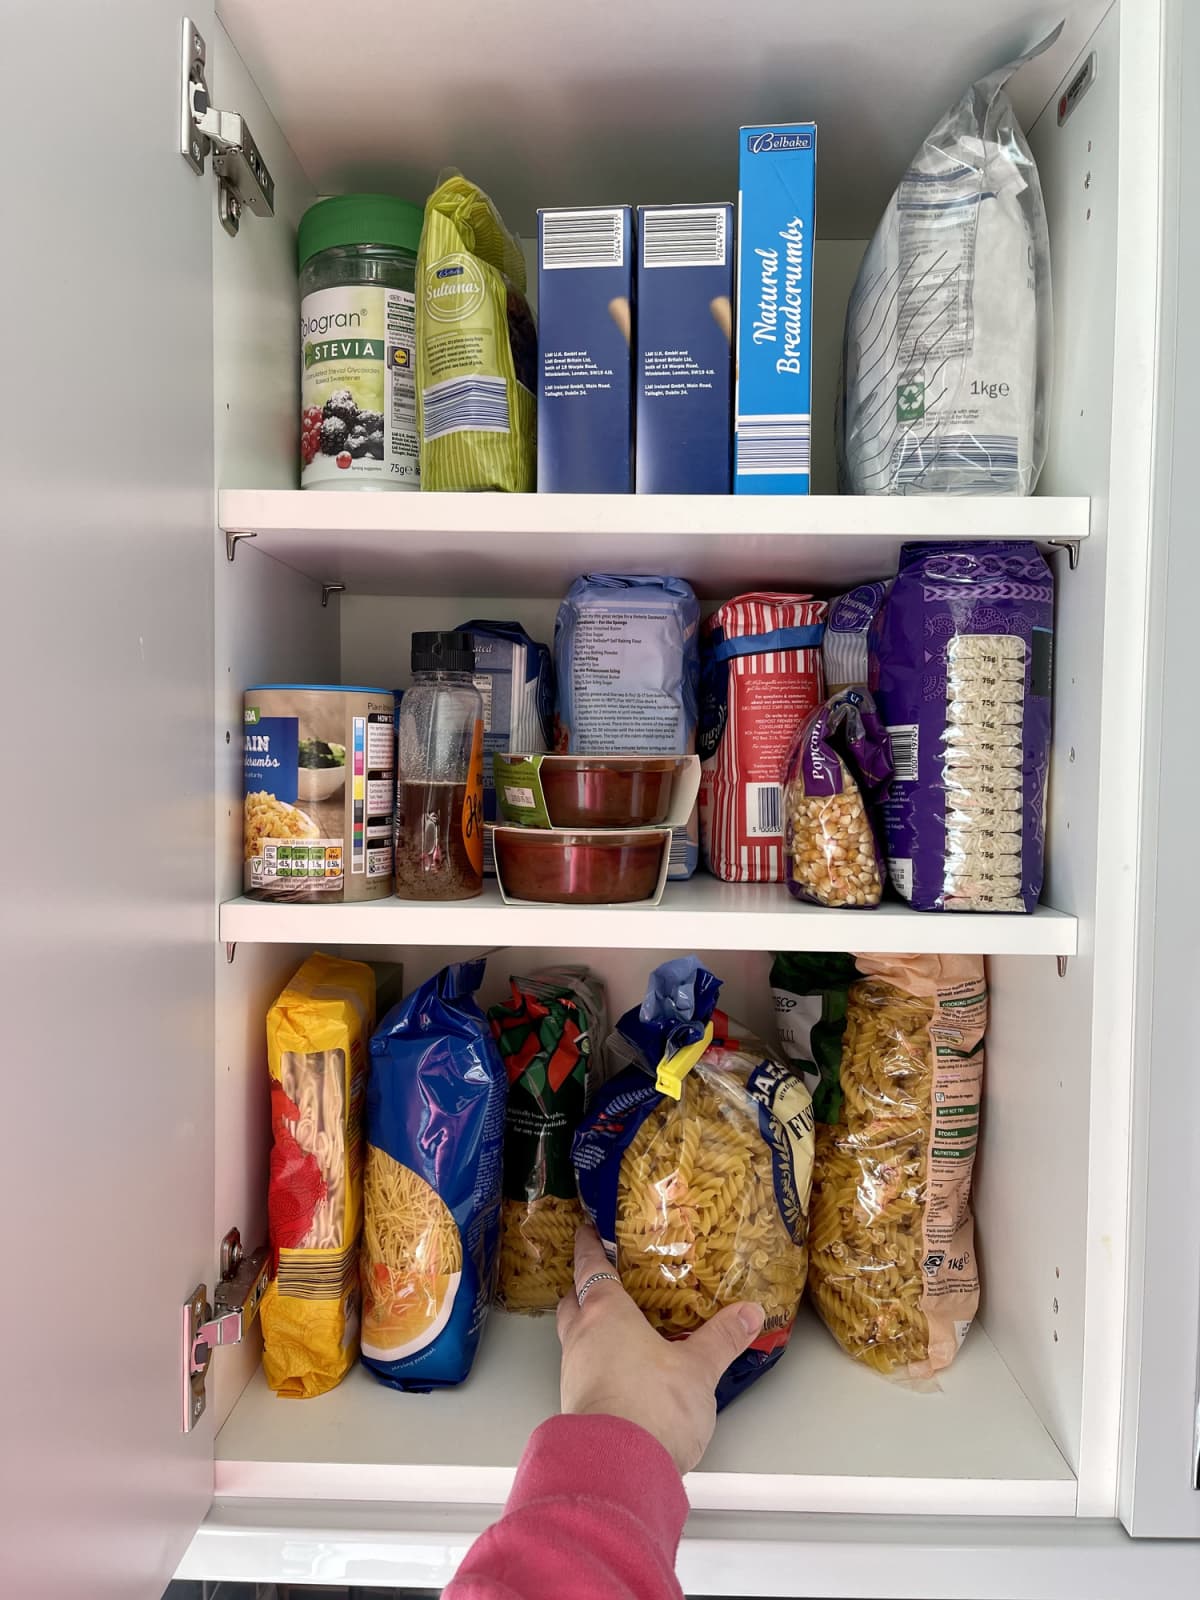 A person reaches into a heavily stocked pantry.